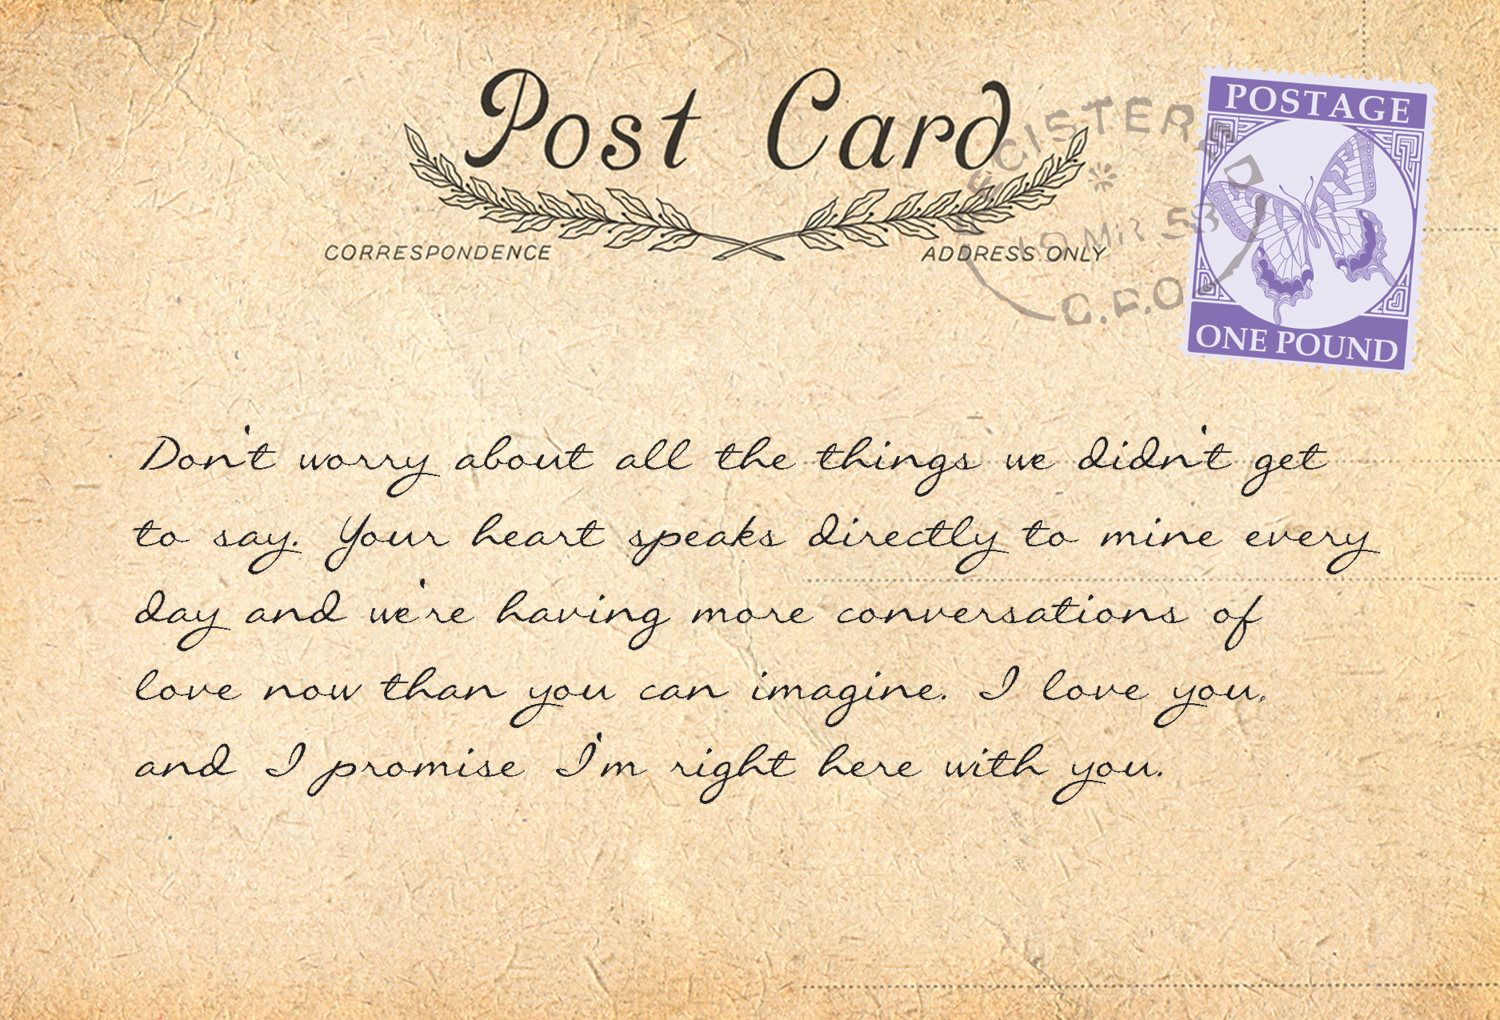 POSTCARDS FROM HEAVEN 2 - back 2